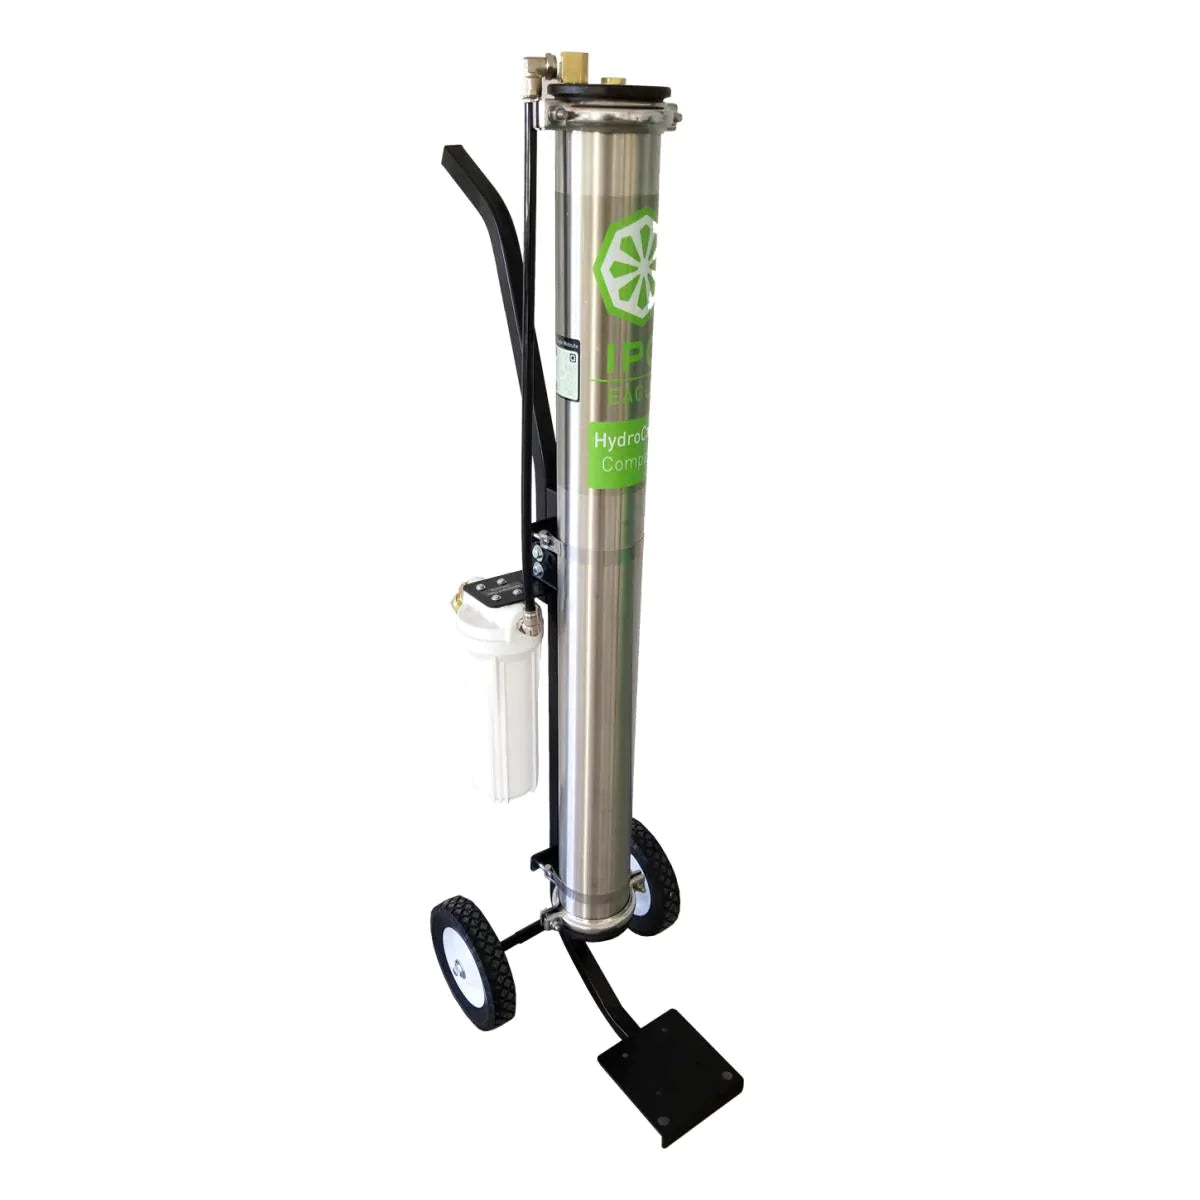 IPC Eagle Hydro Cart Compact Water Fed Pole Window Cleaning Cart (25' & 35' Pole Options Available)